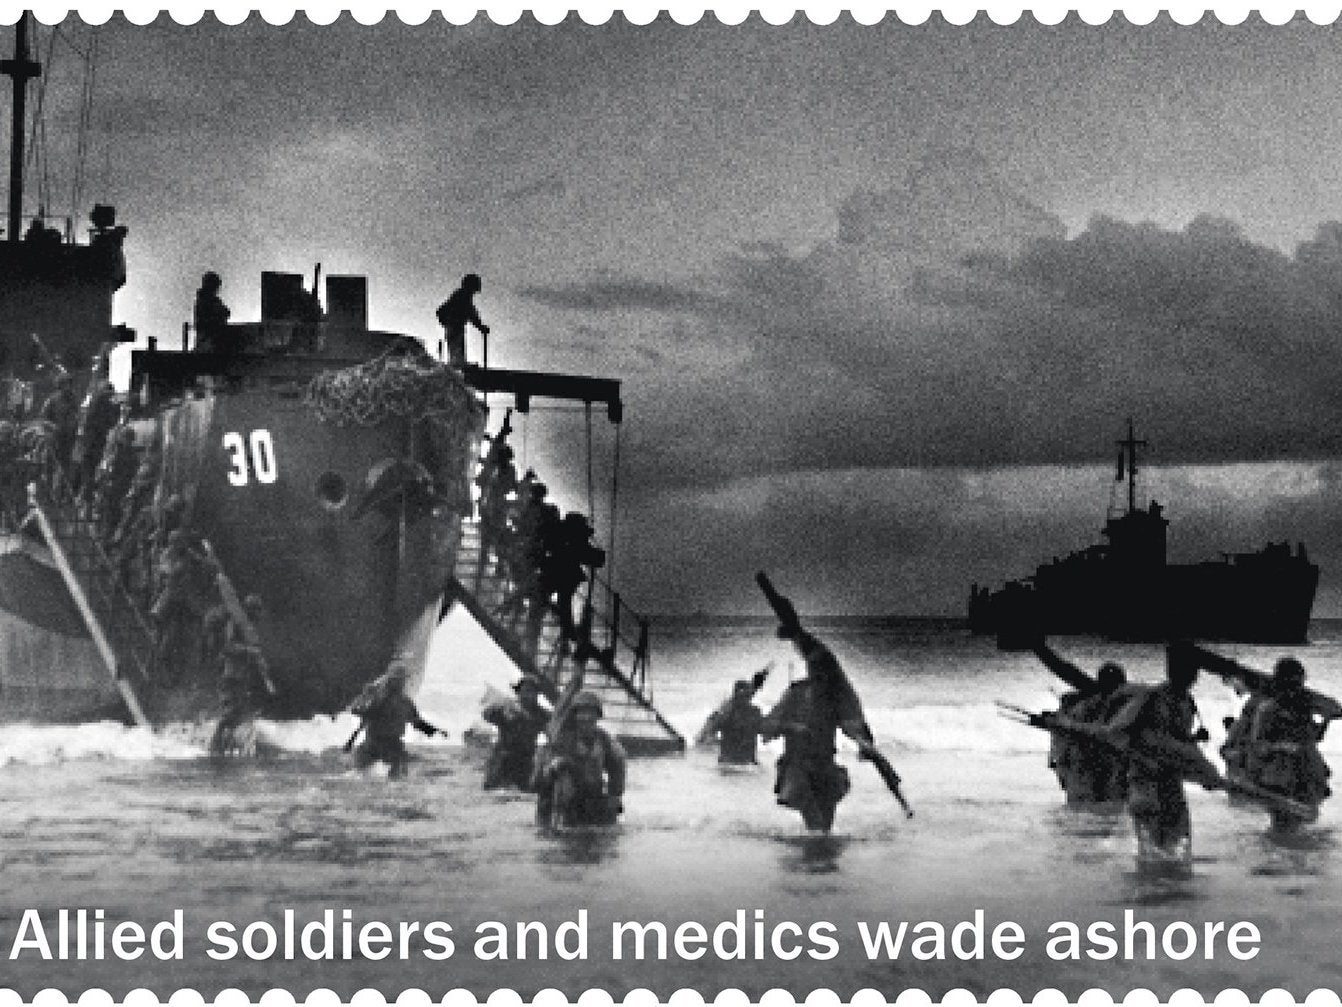 The stamp showed US troops in Indonesia leaving a ship that did not feature in the Normandy landings